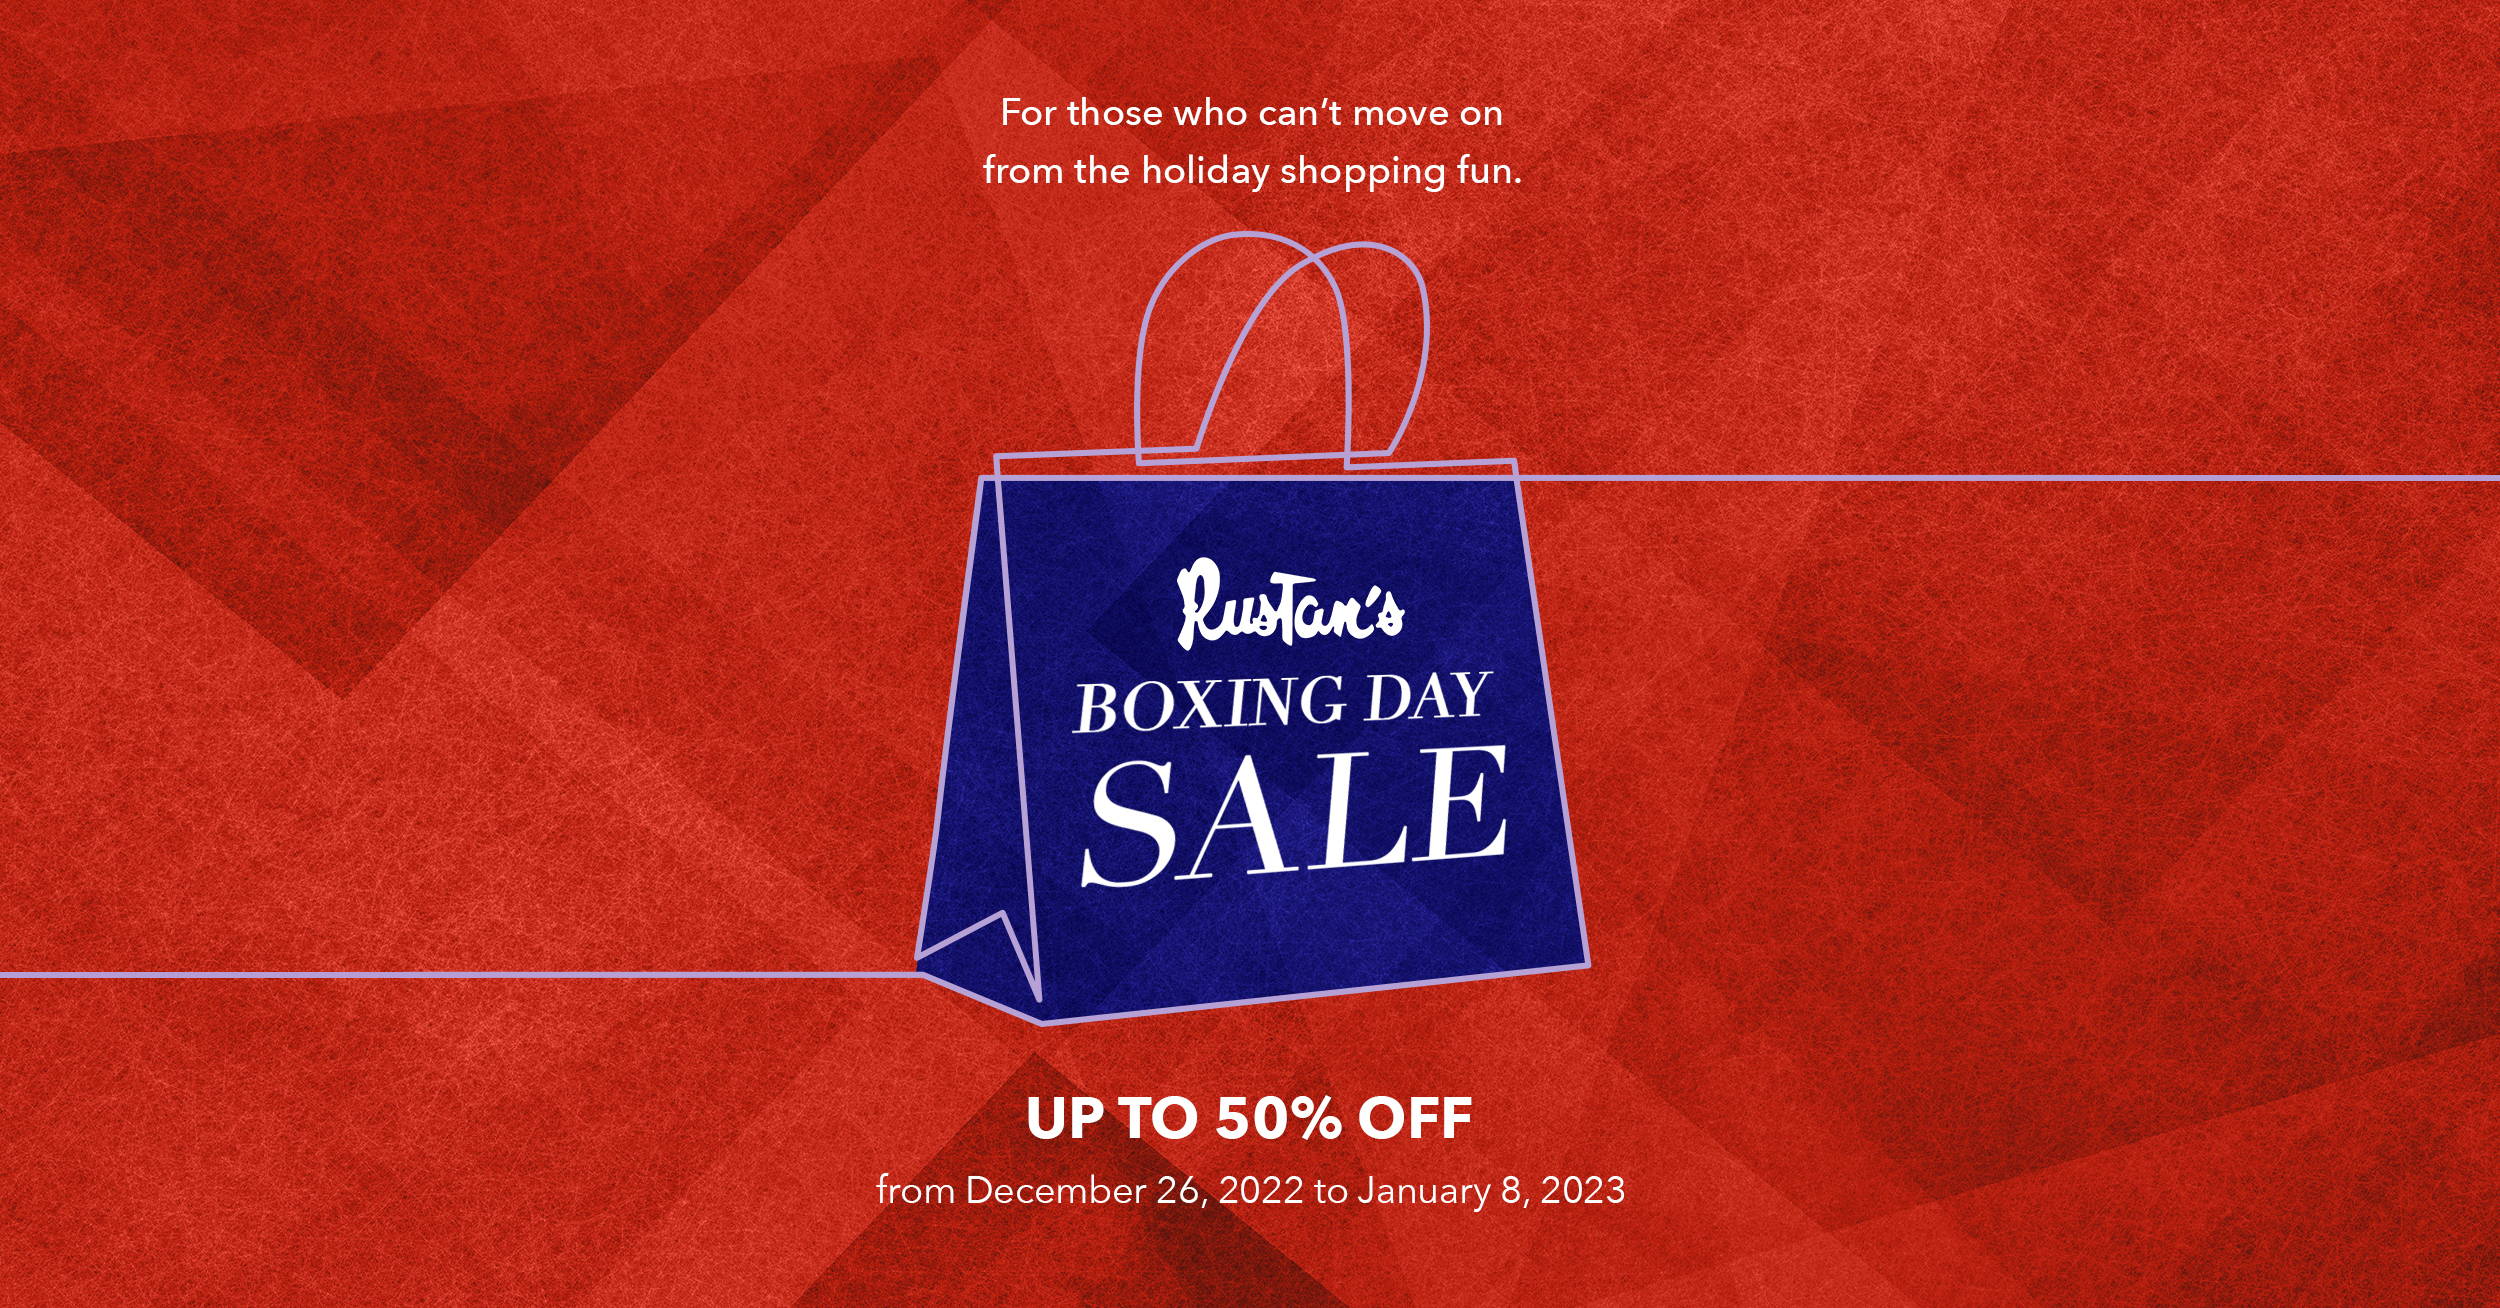 Rustan's Boxing Day Sale: In-Store Offers